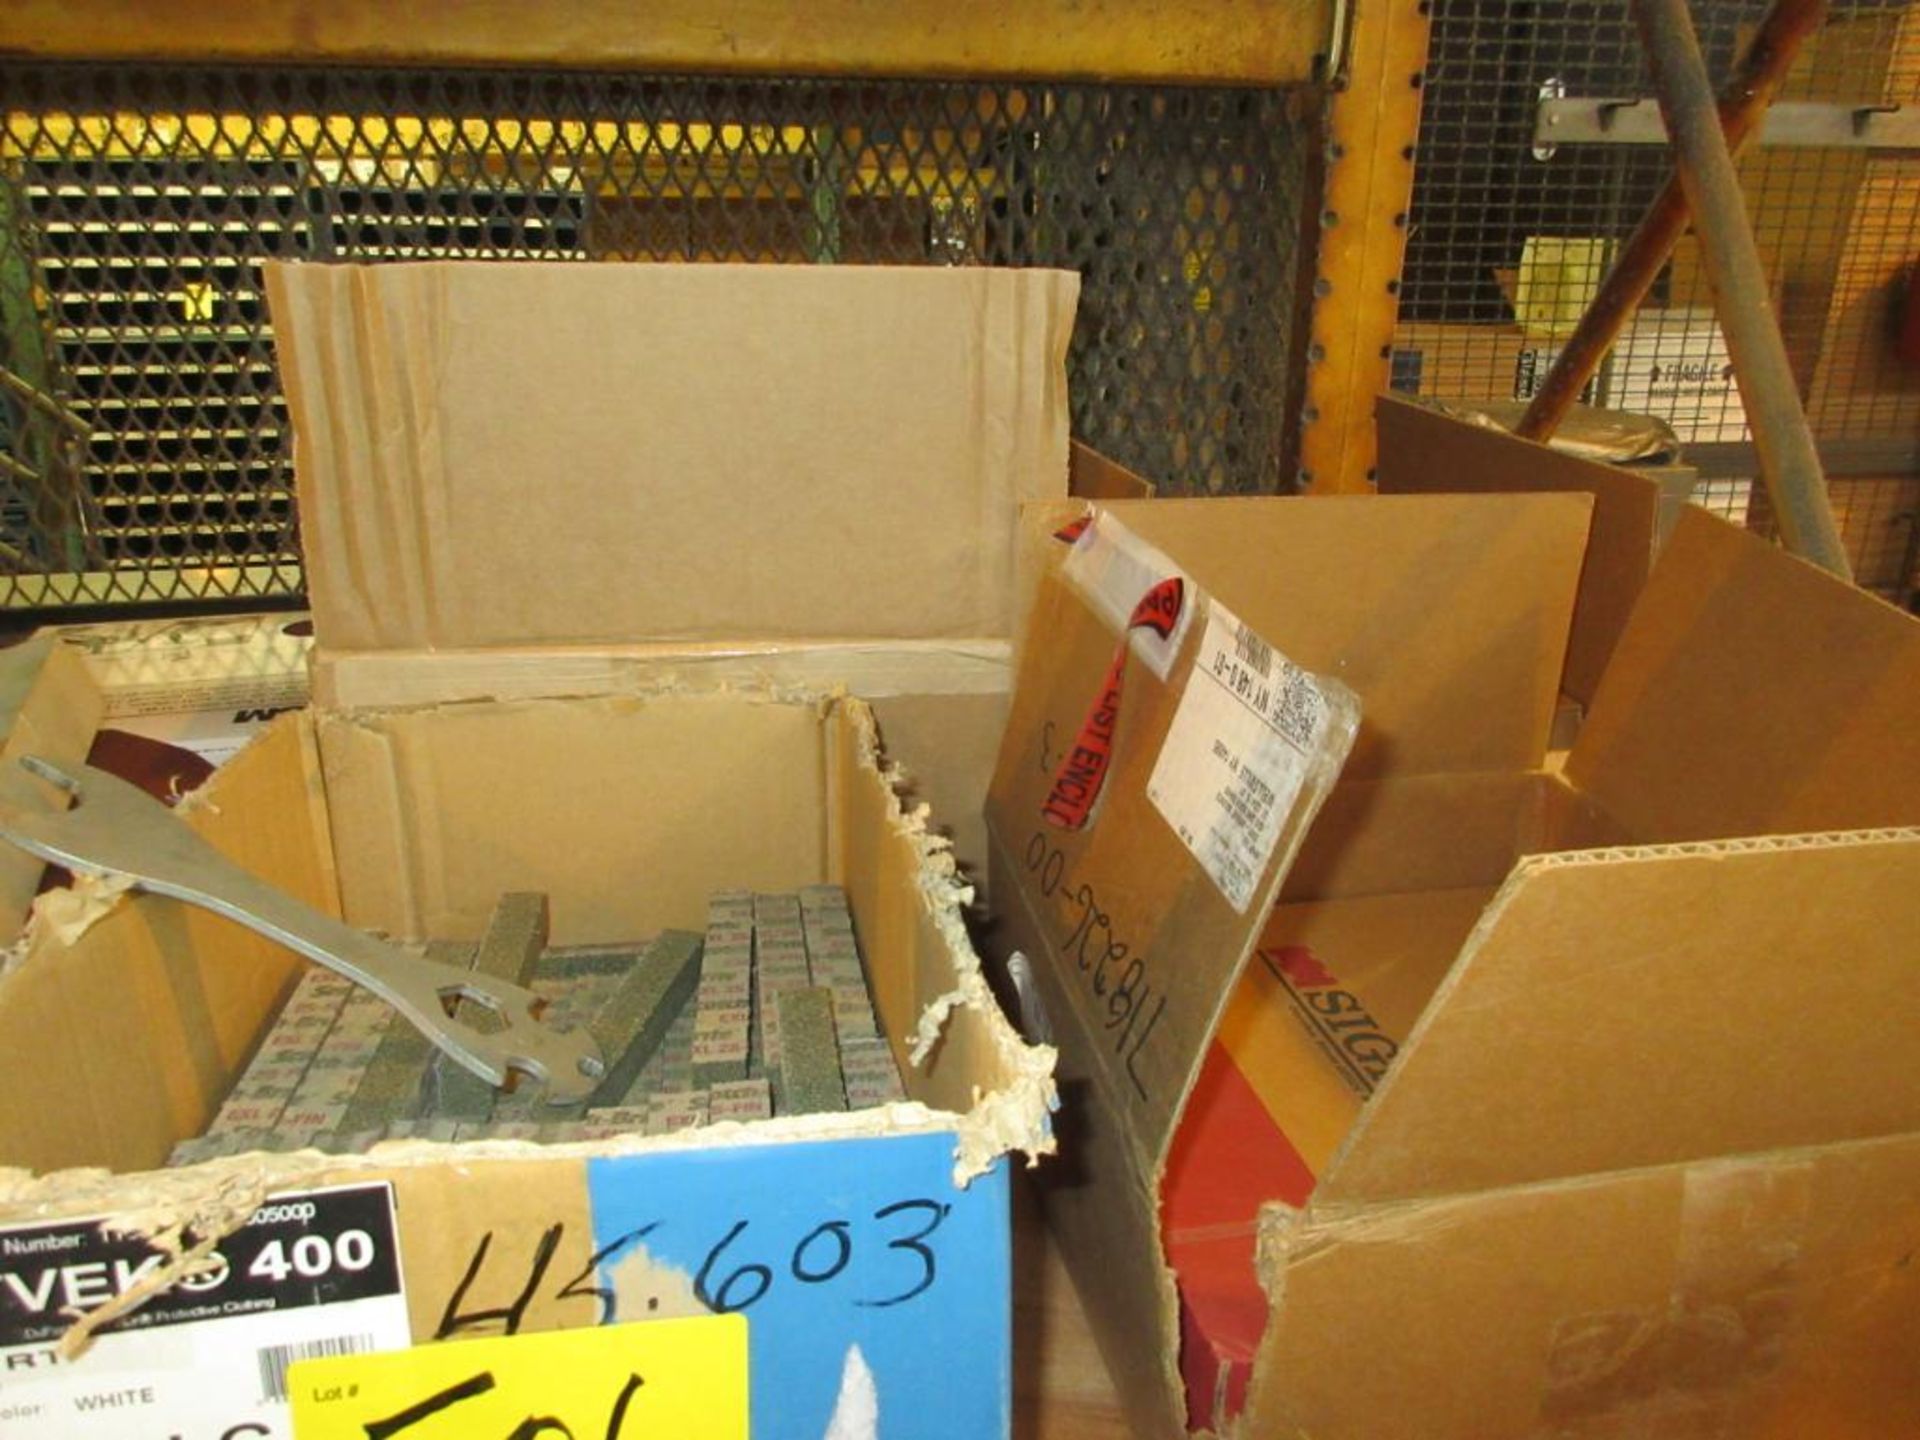 CONTENTS OF (22) SECTIONS PALLET RACK: ASSORTED ABRASIVES, SUNNEN STONES, TOOL BITS, DOVETAIL CUTTER - Image 7 of 43